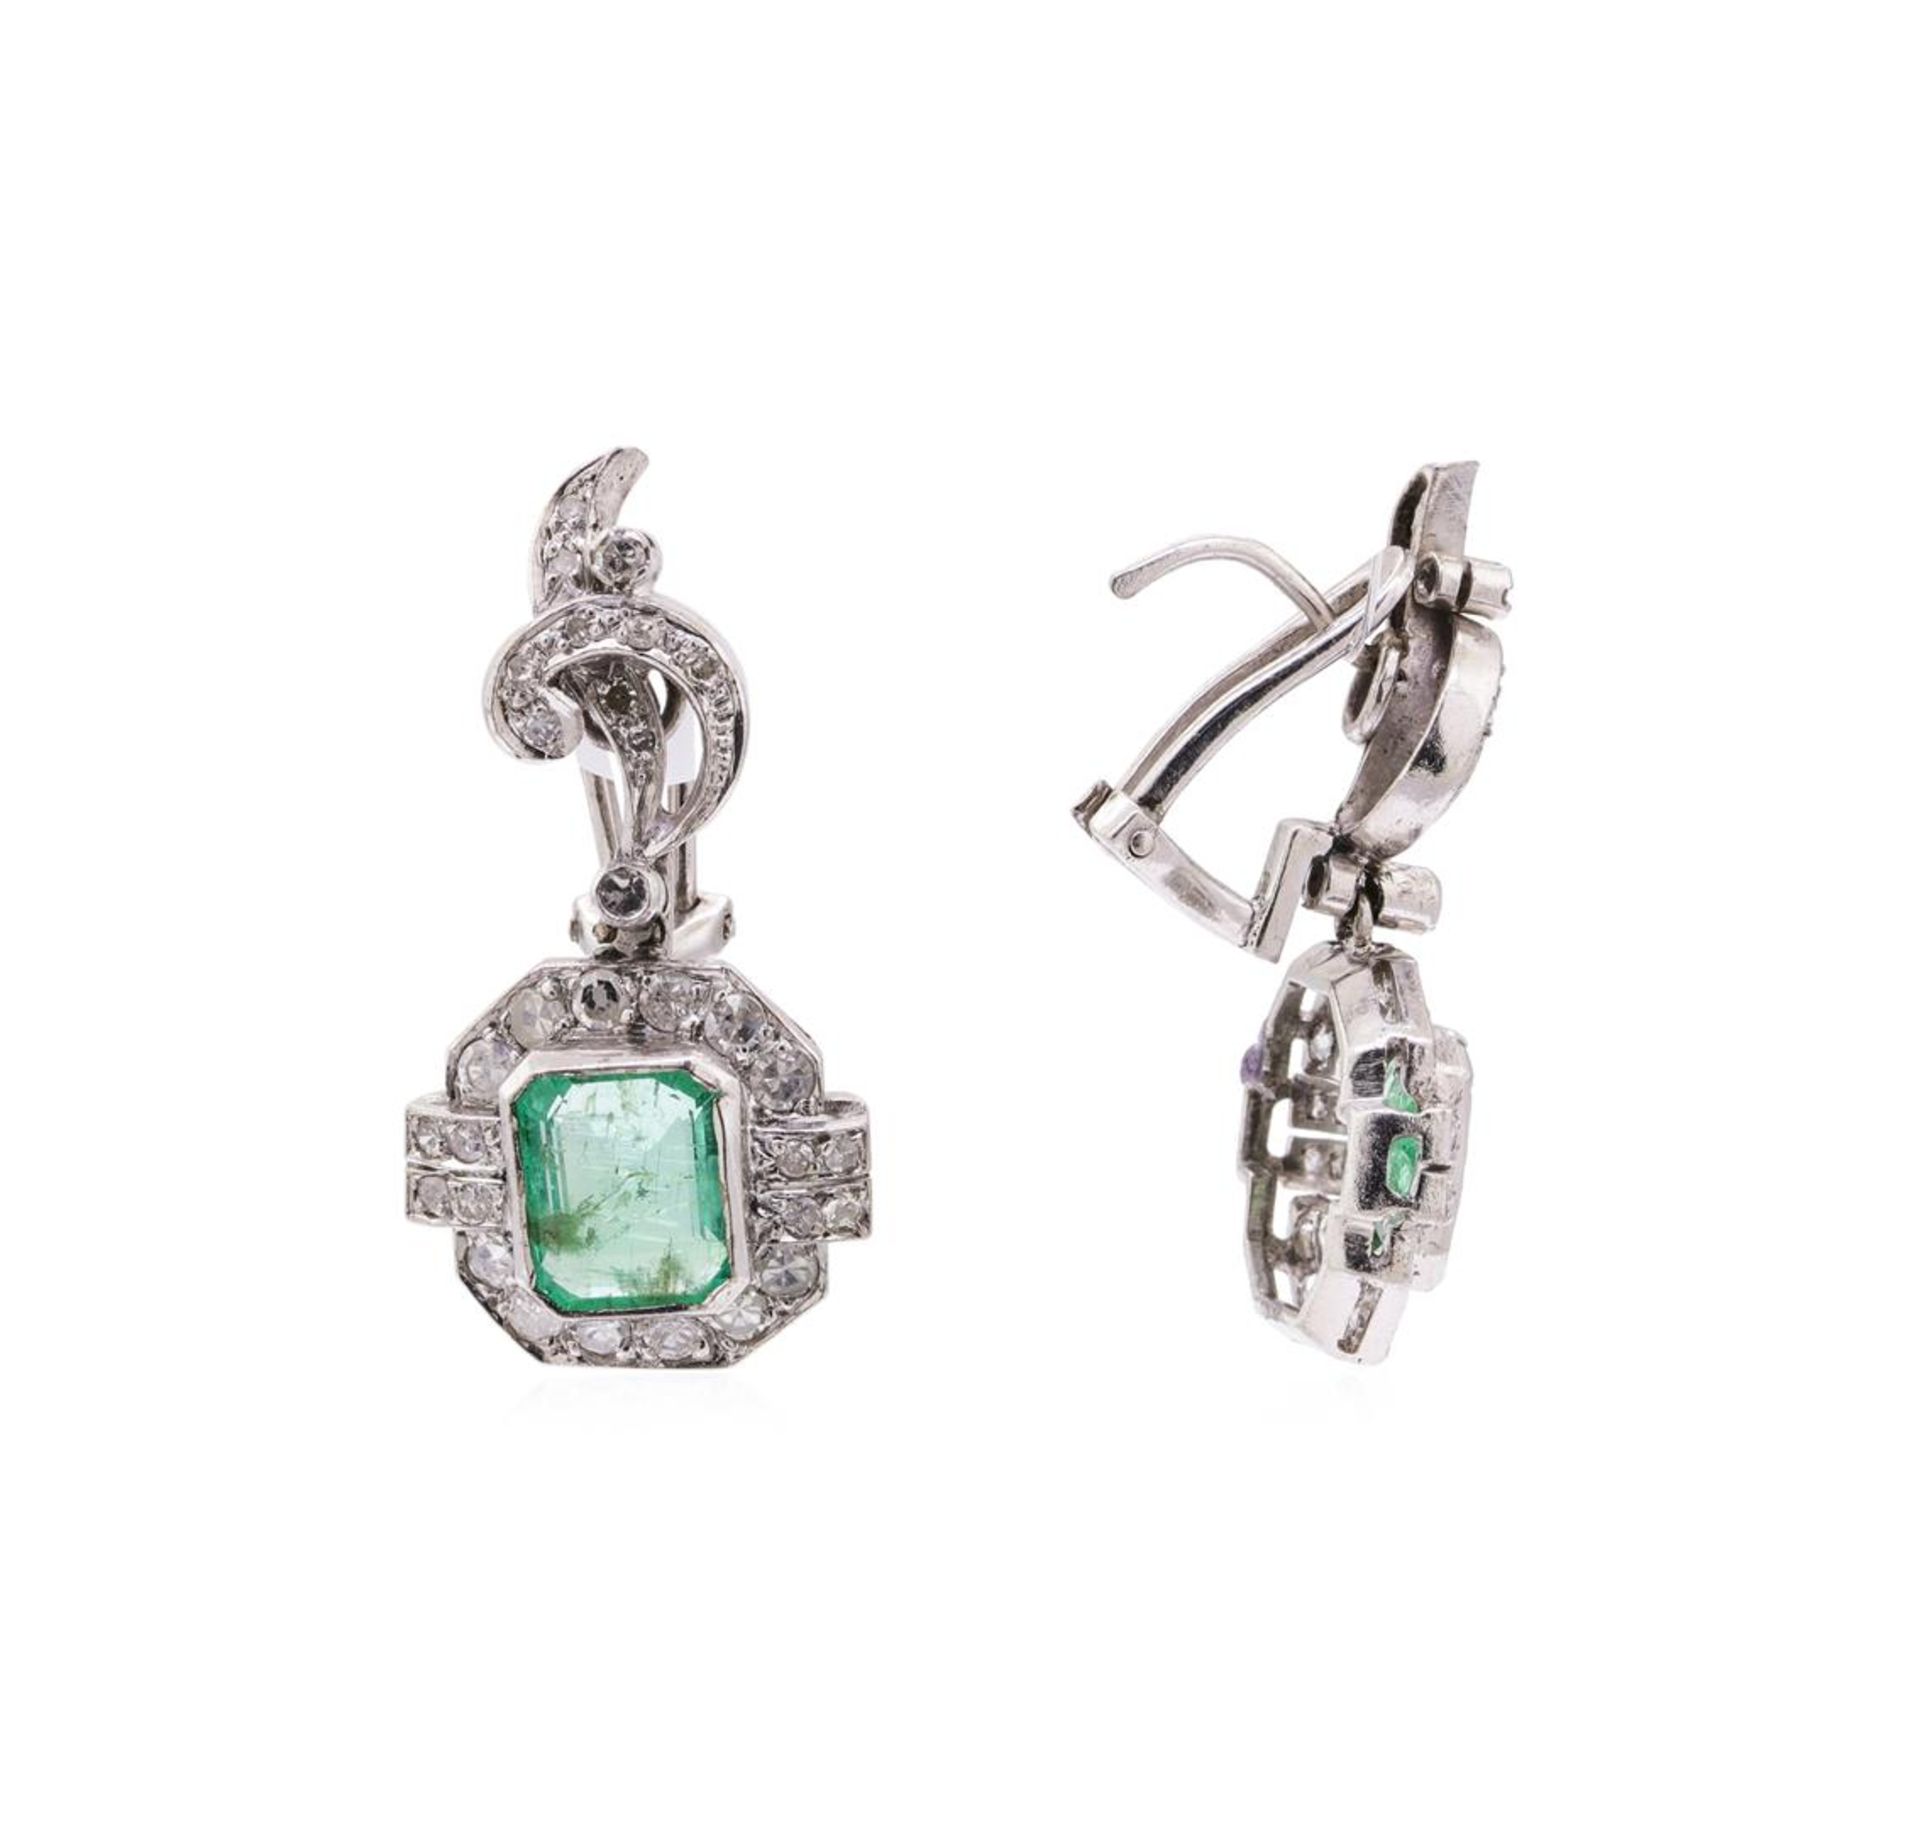 7.80 ctw Emerald And Diamond Ring And Earrings - 14KT White Gold - Image 6 of 7